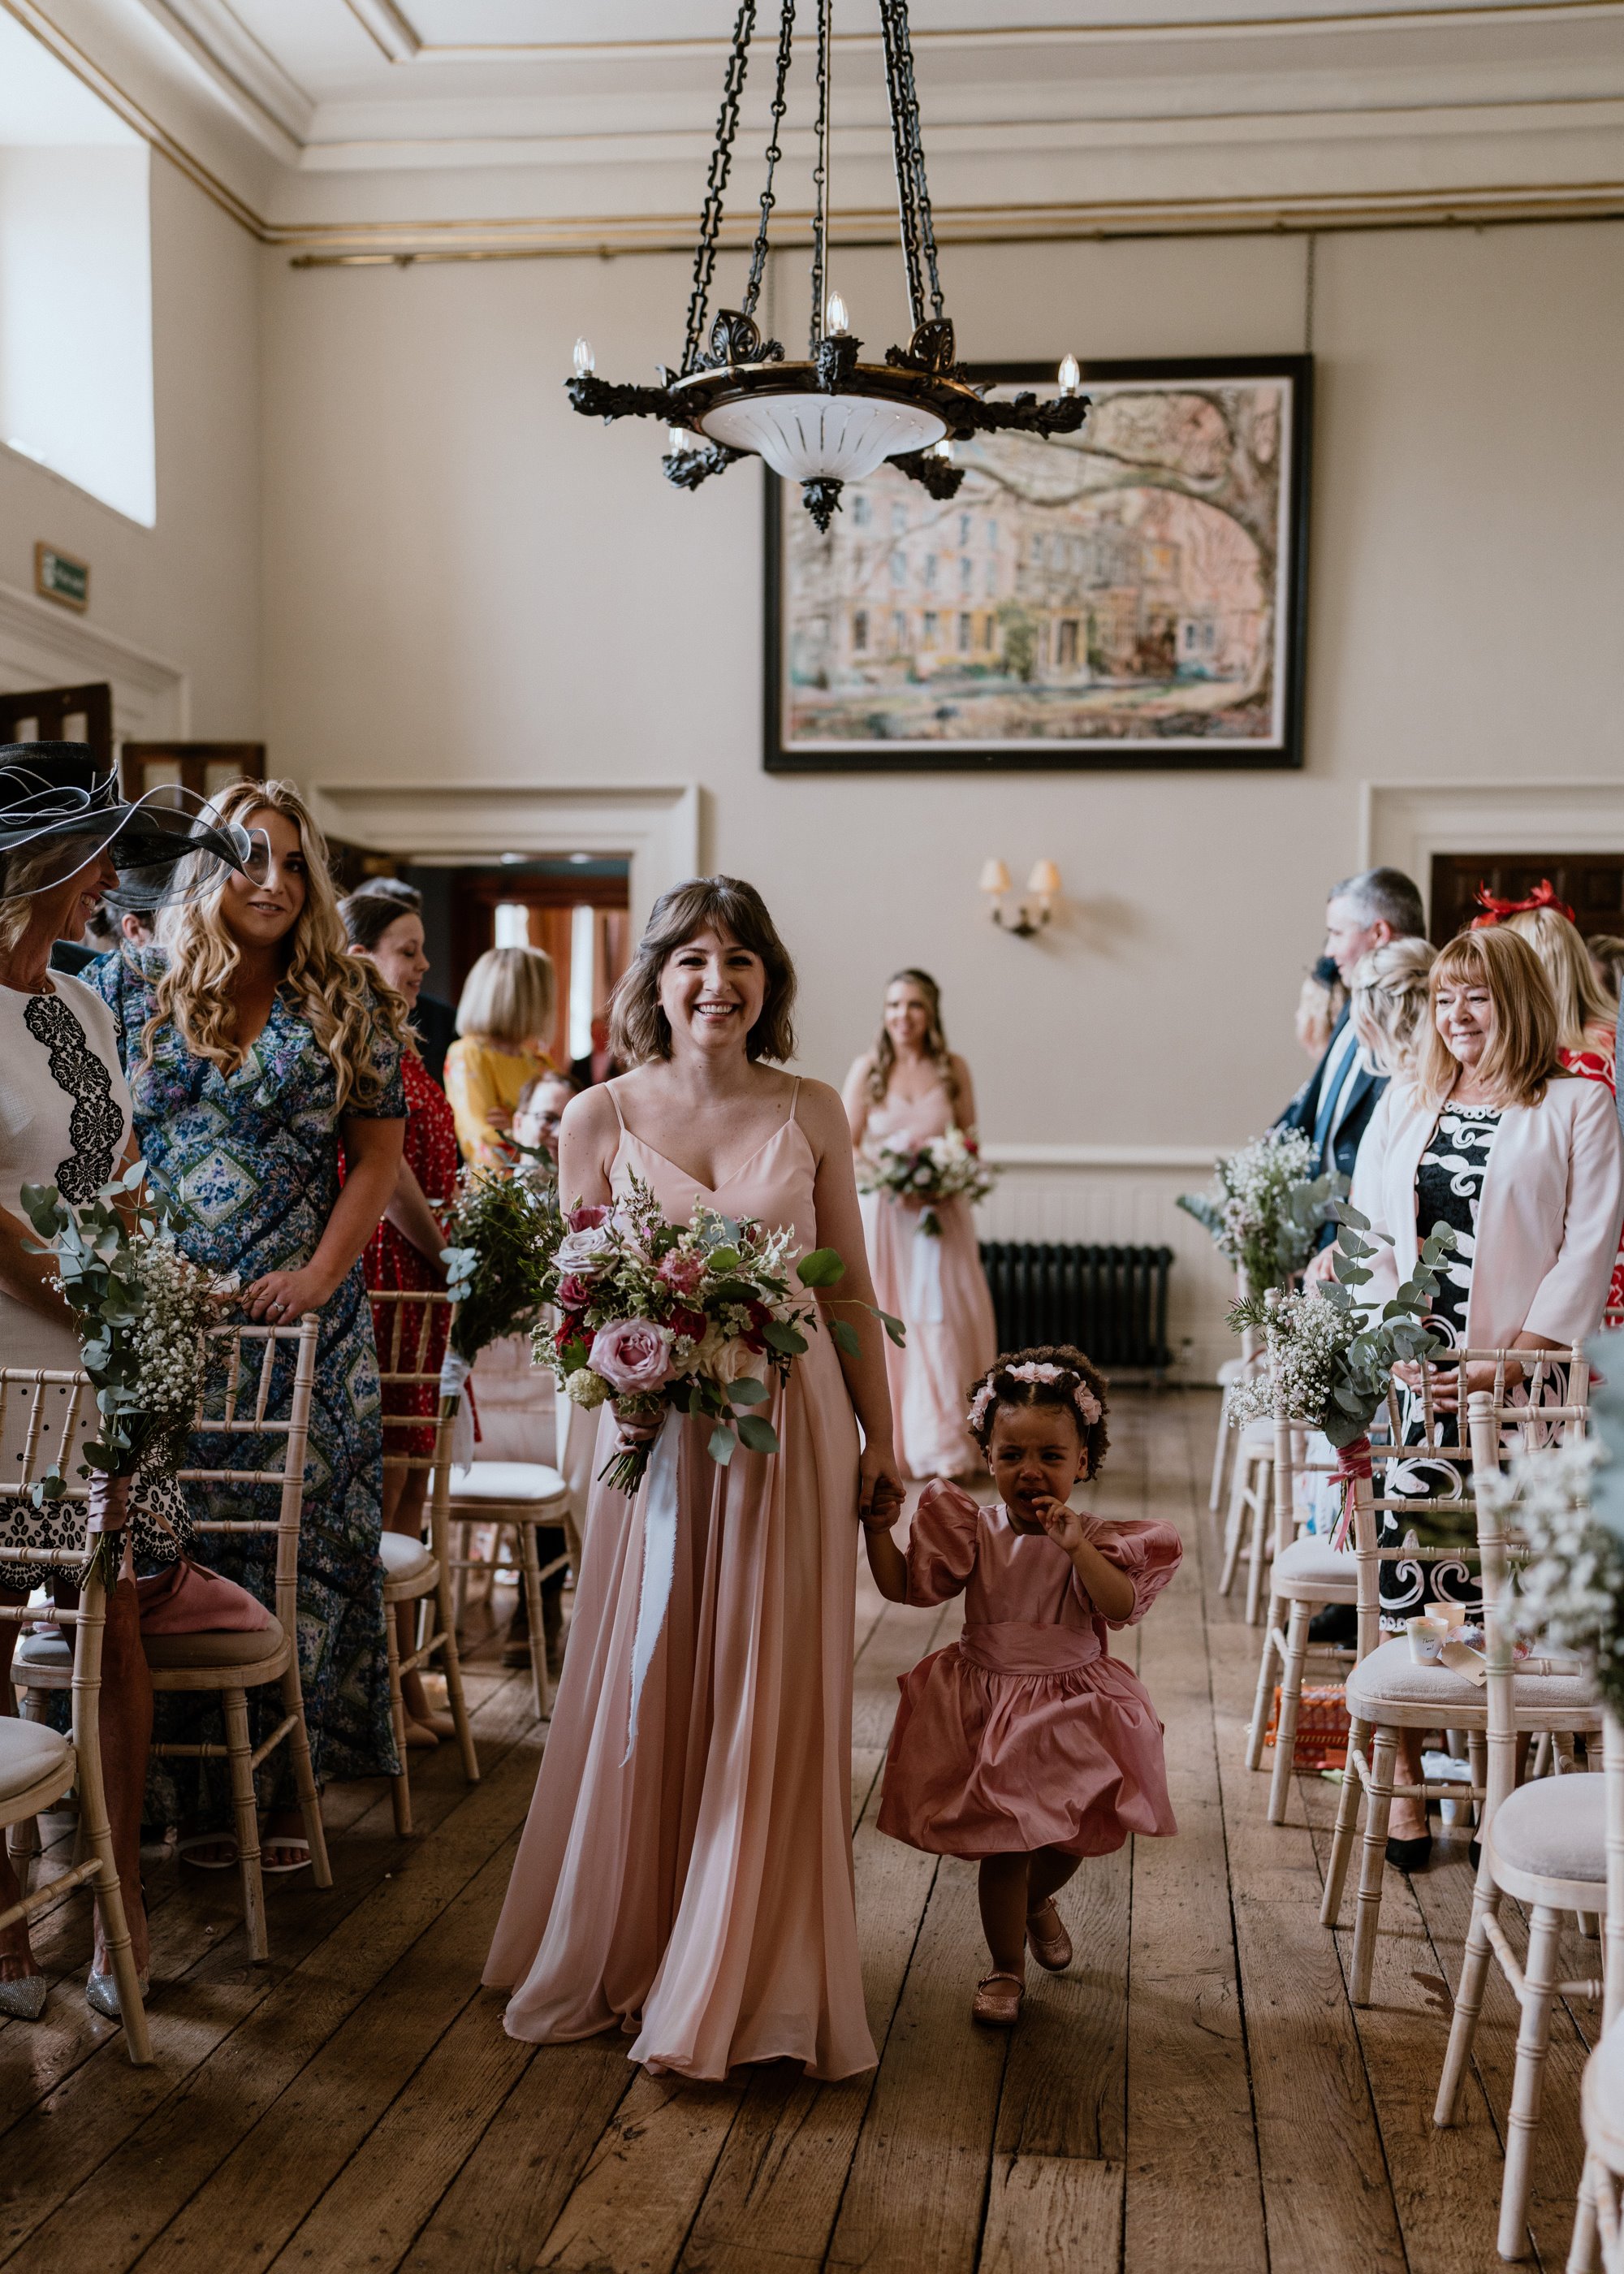 Bridesmaids and flower girl in pink dresses walk down the aisle in beautiful mansion house wedding venue